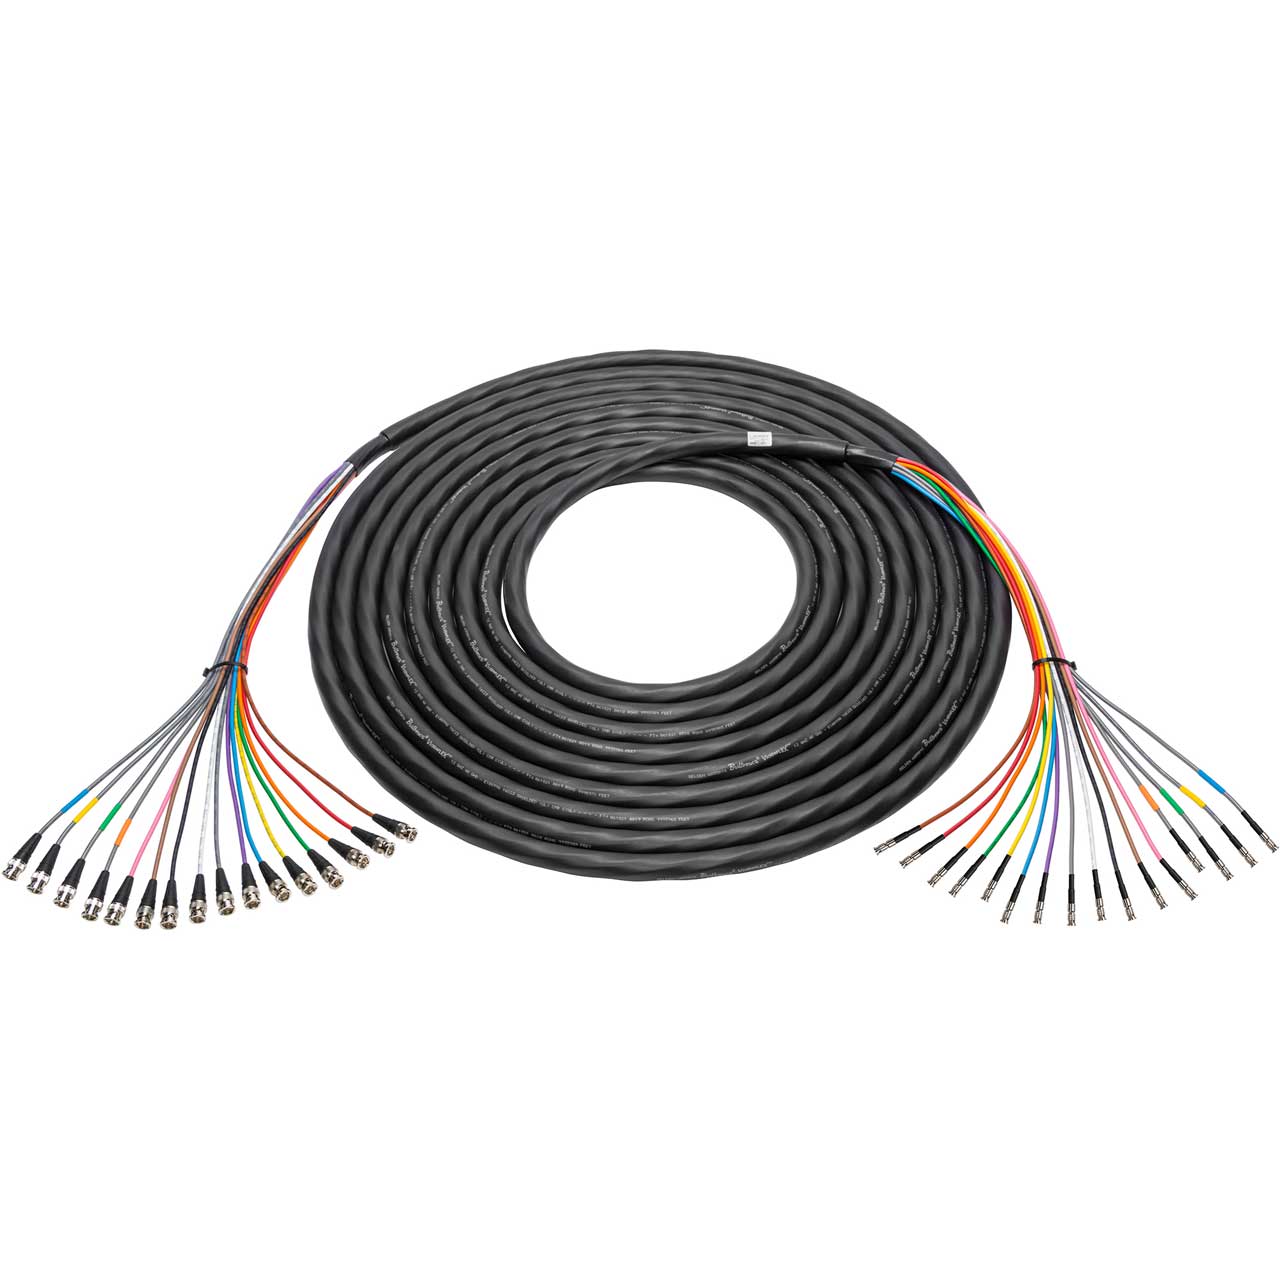 Laird 4855R16-BMB-125 16-Channel 12G-SDI / 4K UHD BNC Male to HD-BNC Male Snake Cable - 125 Foot 4855R16-BMB-125